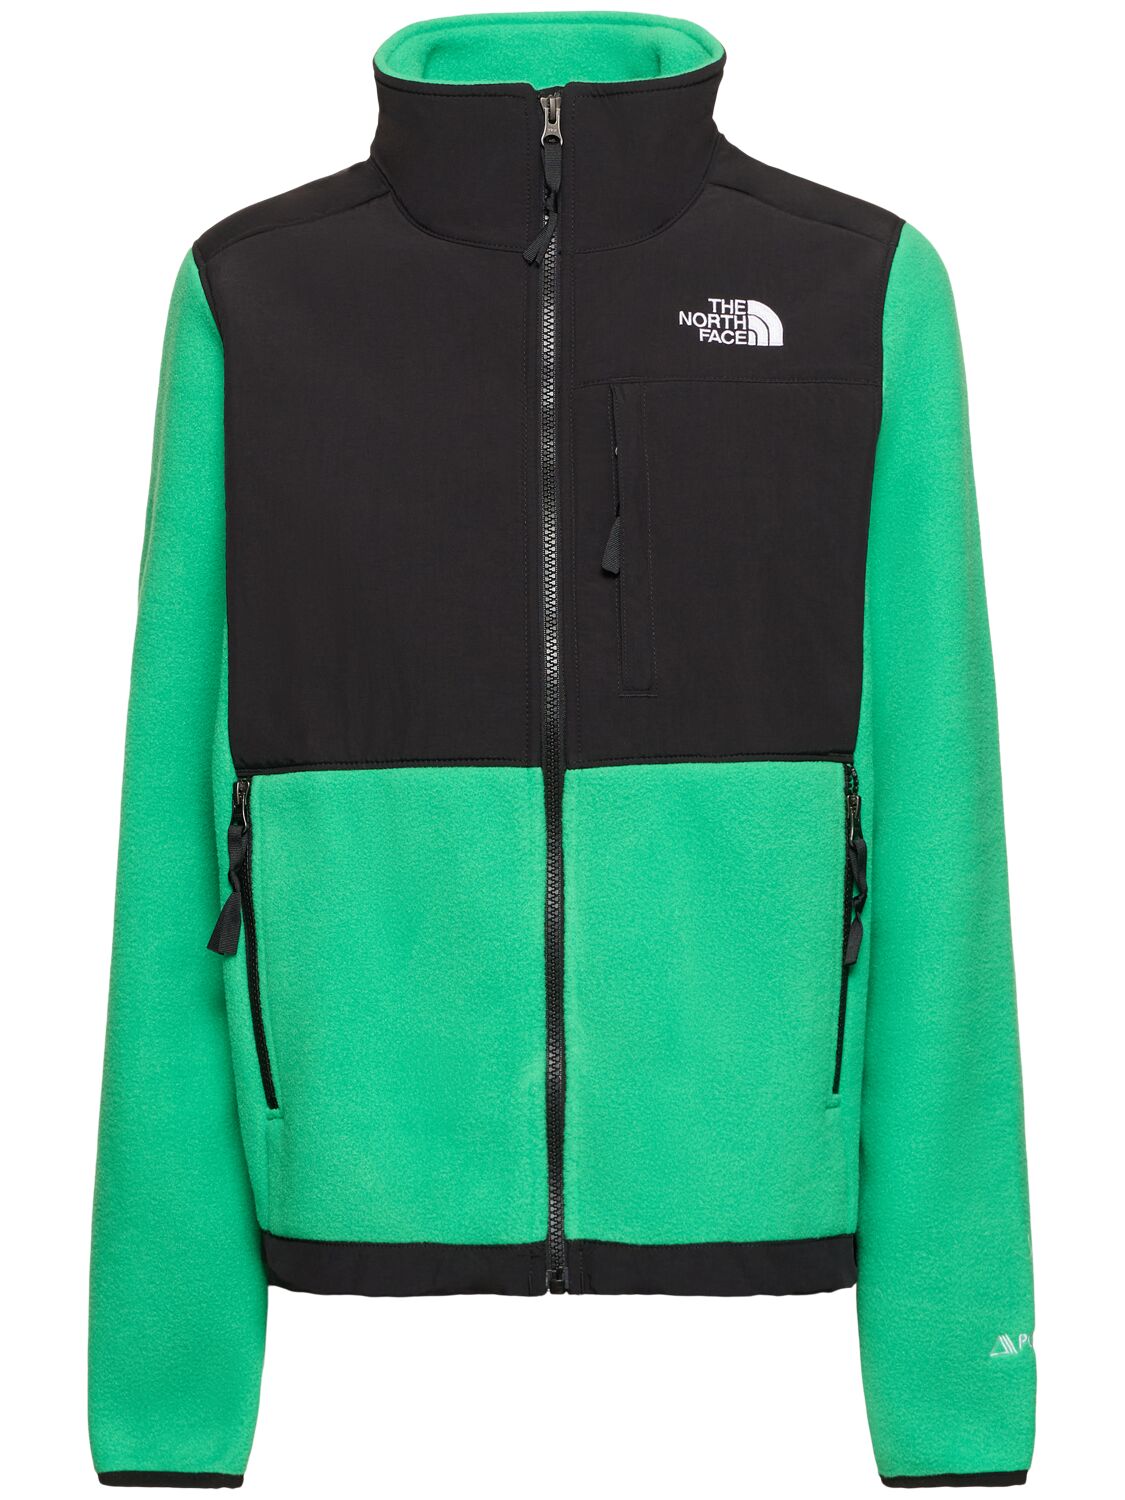 The North Face Denali Jacket In Green